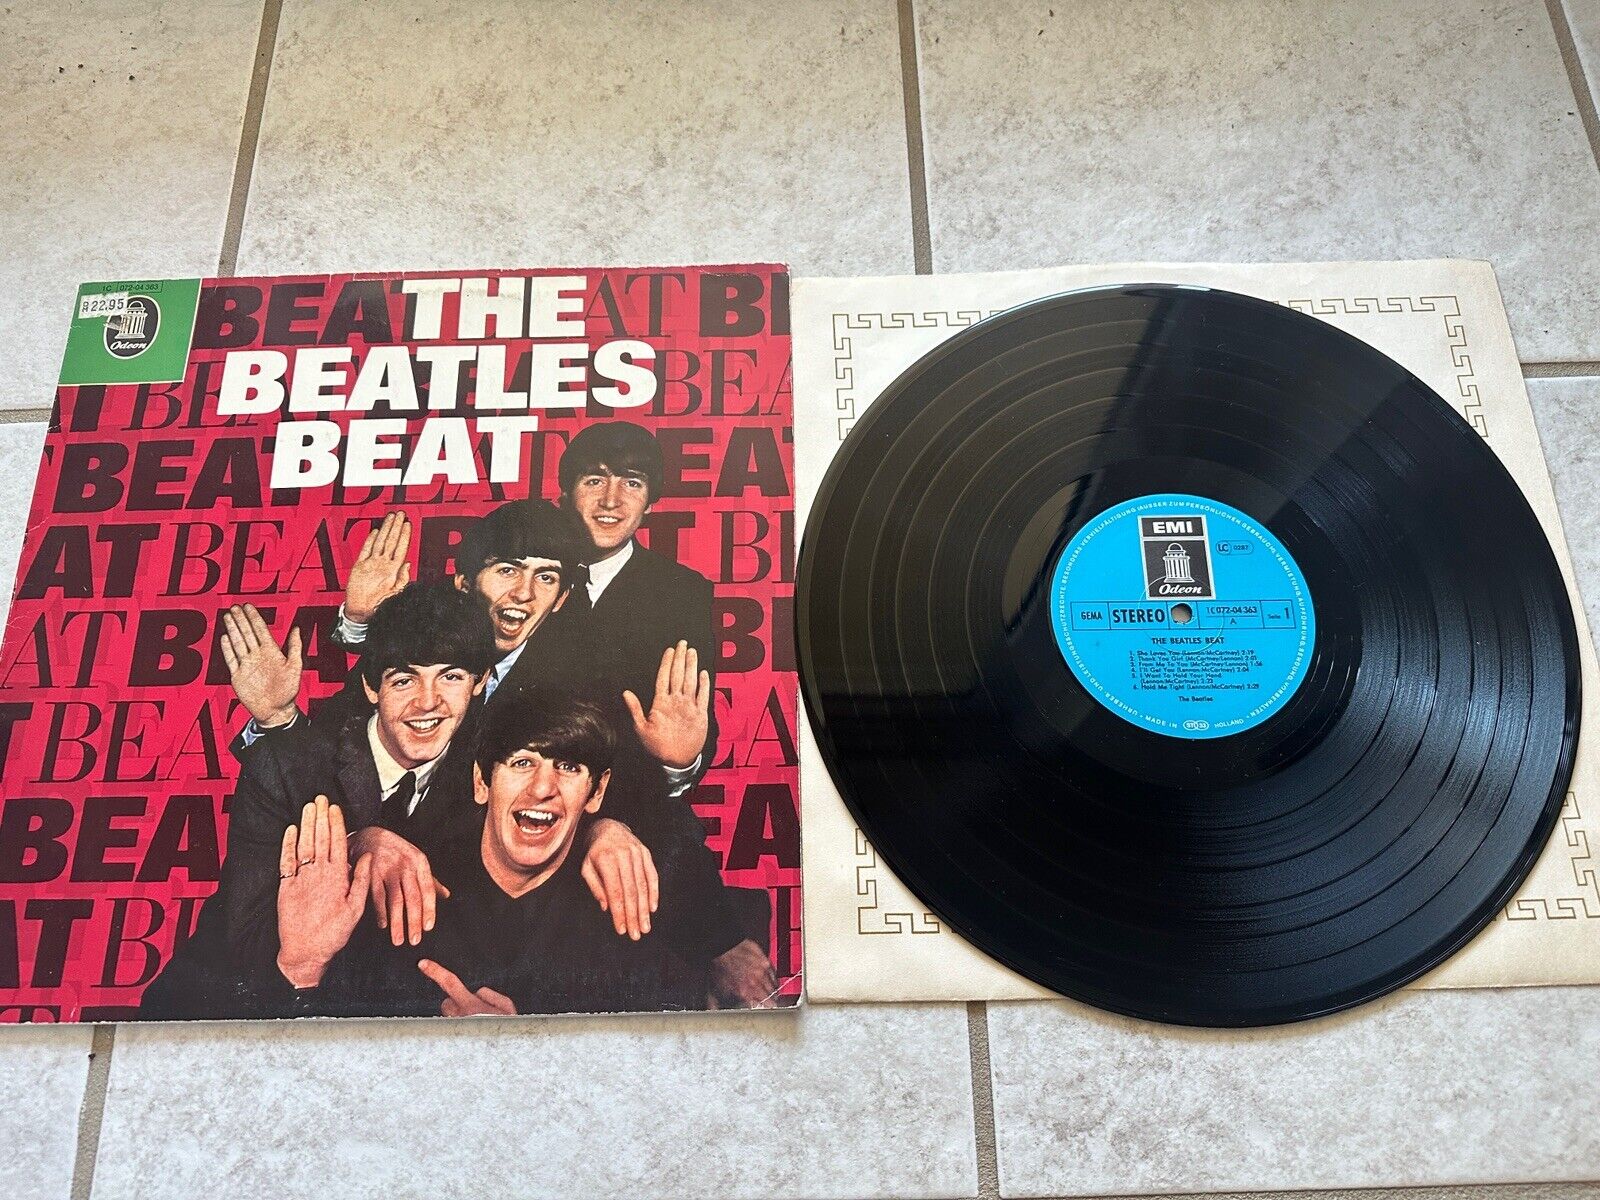 THE BEATLES BEAT ODEON VINYL RECORD ALBUM from Holland